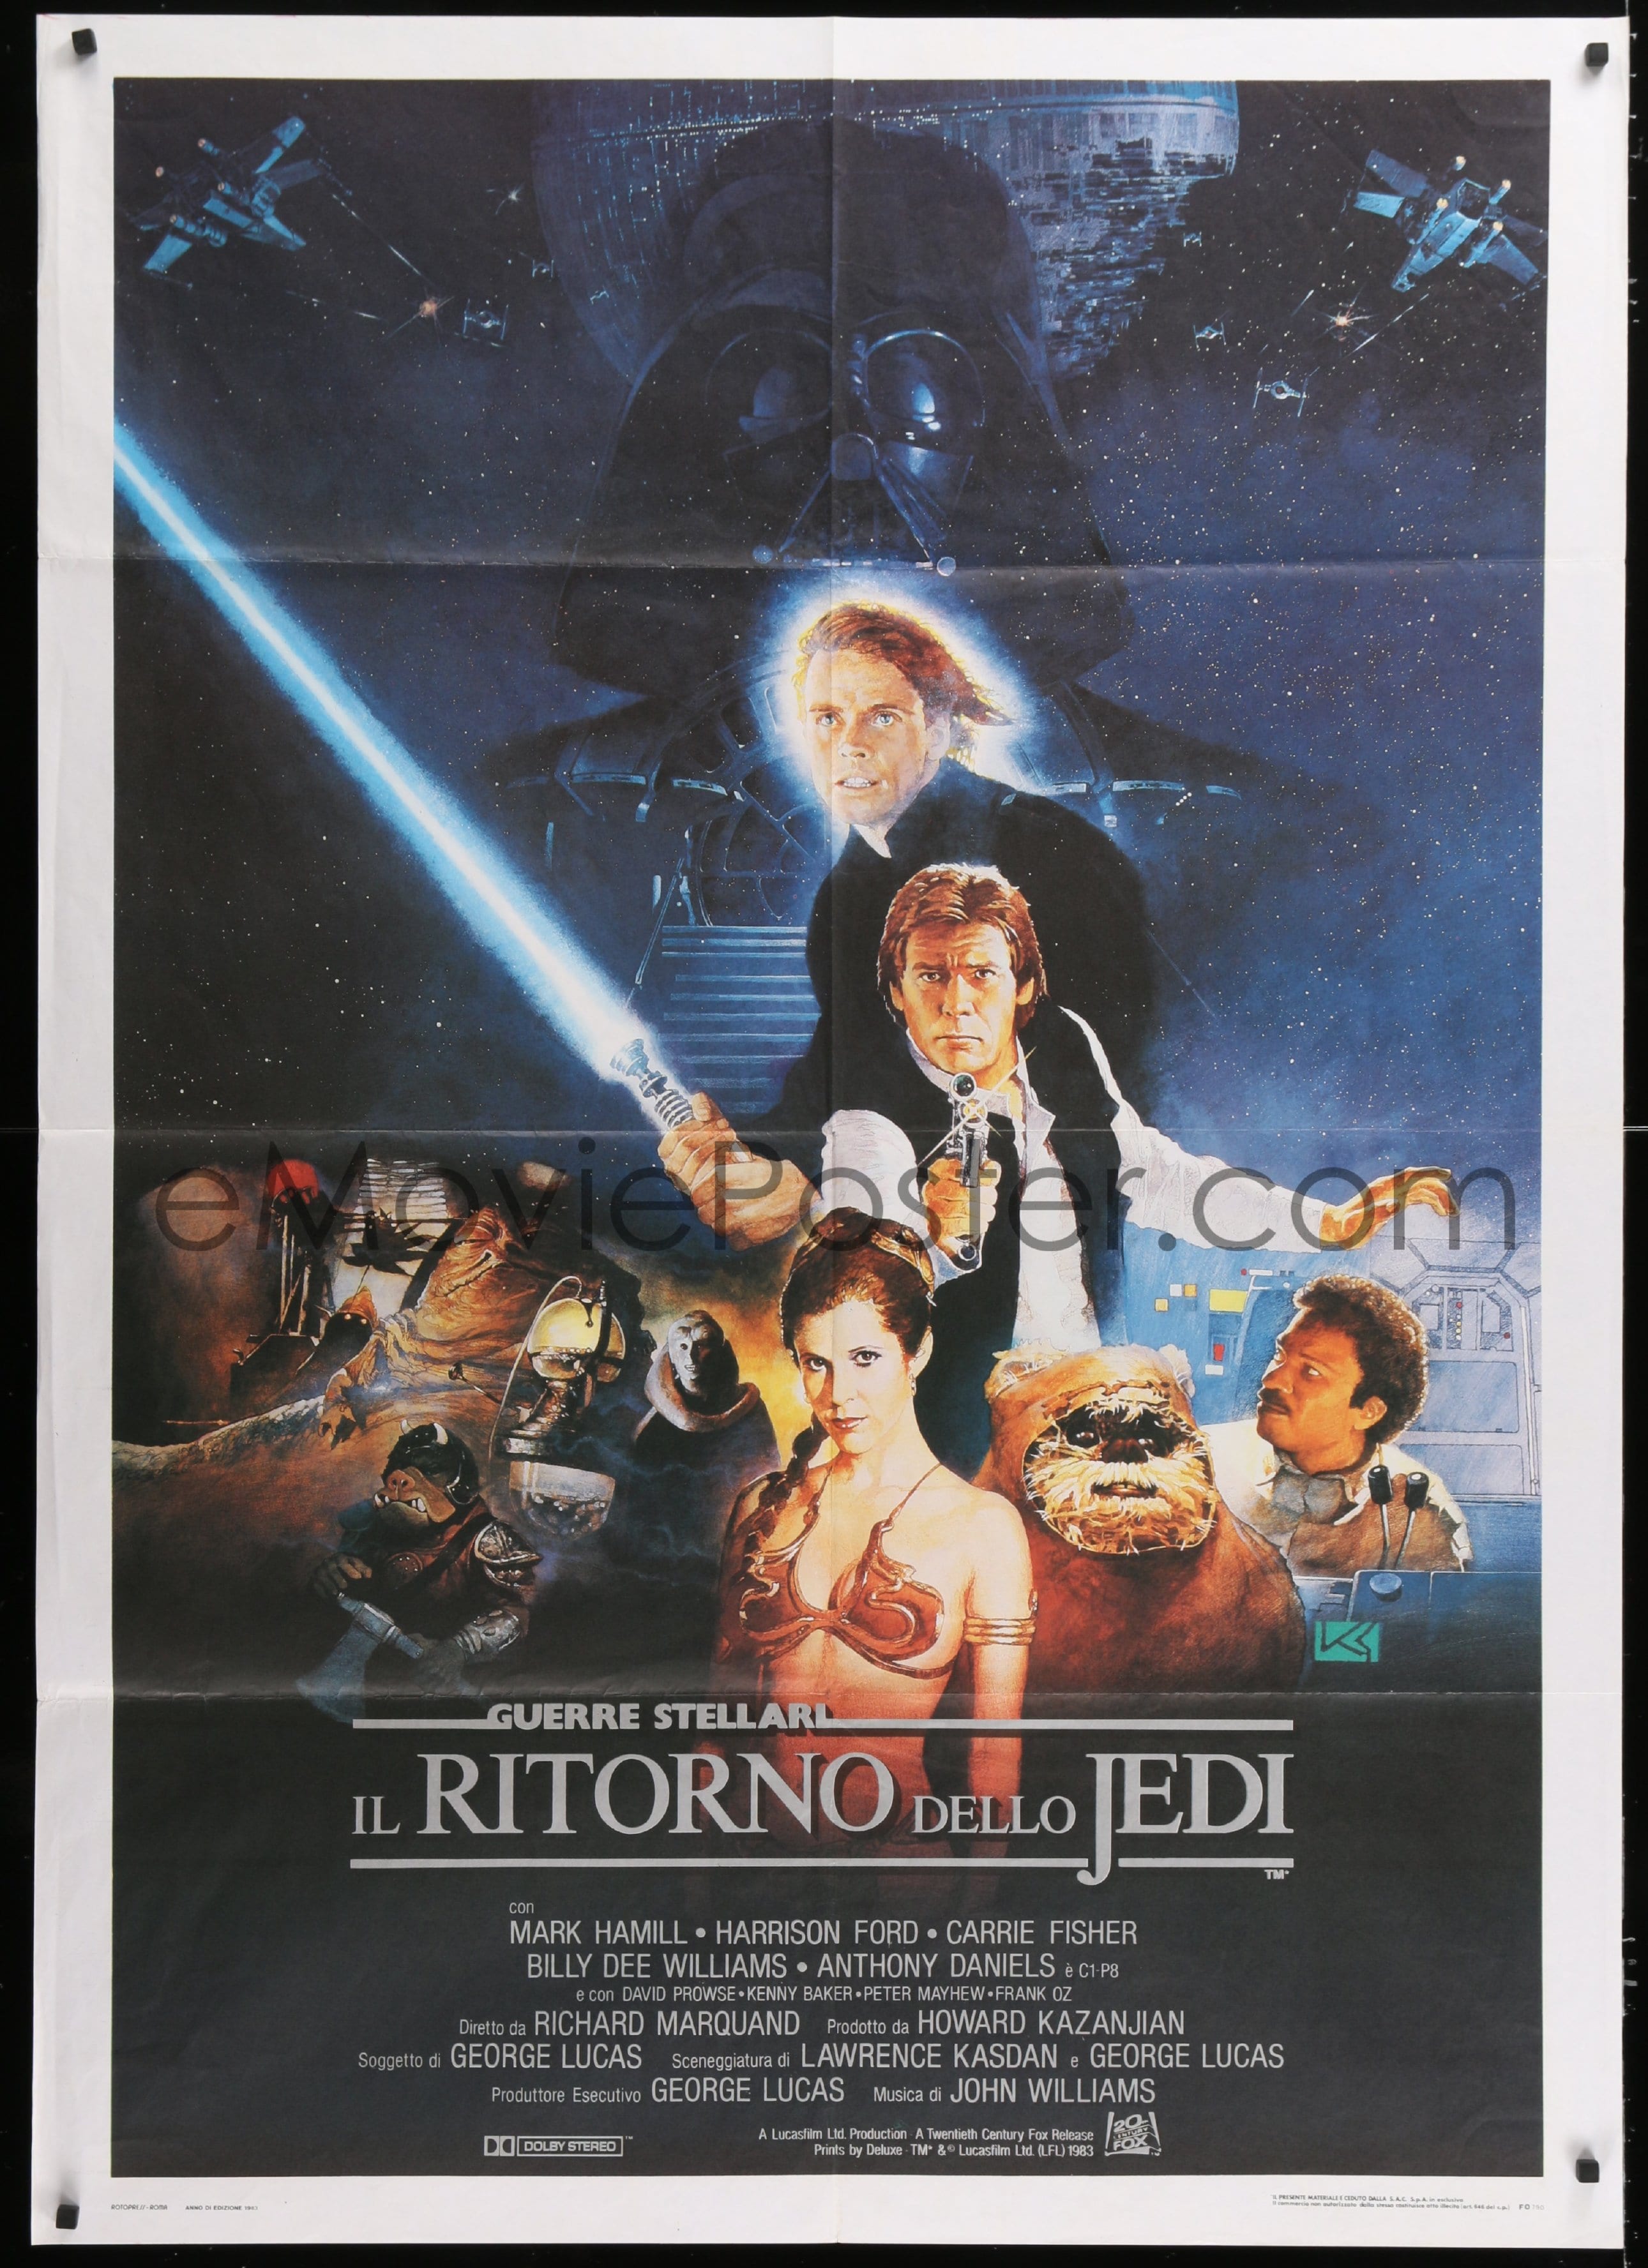 Revenge of the Jedi (1982) poster, US, Original Film Posters Online, Collectibles